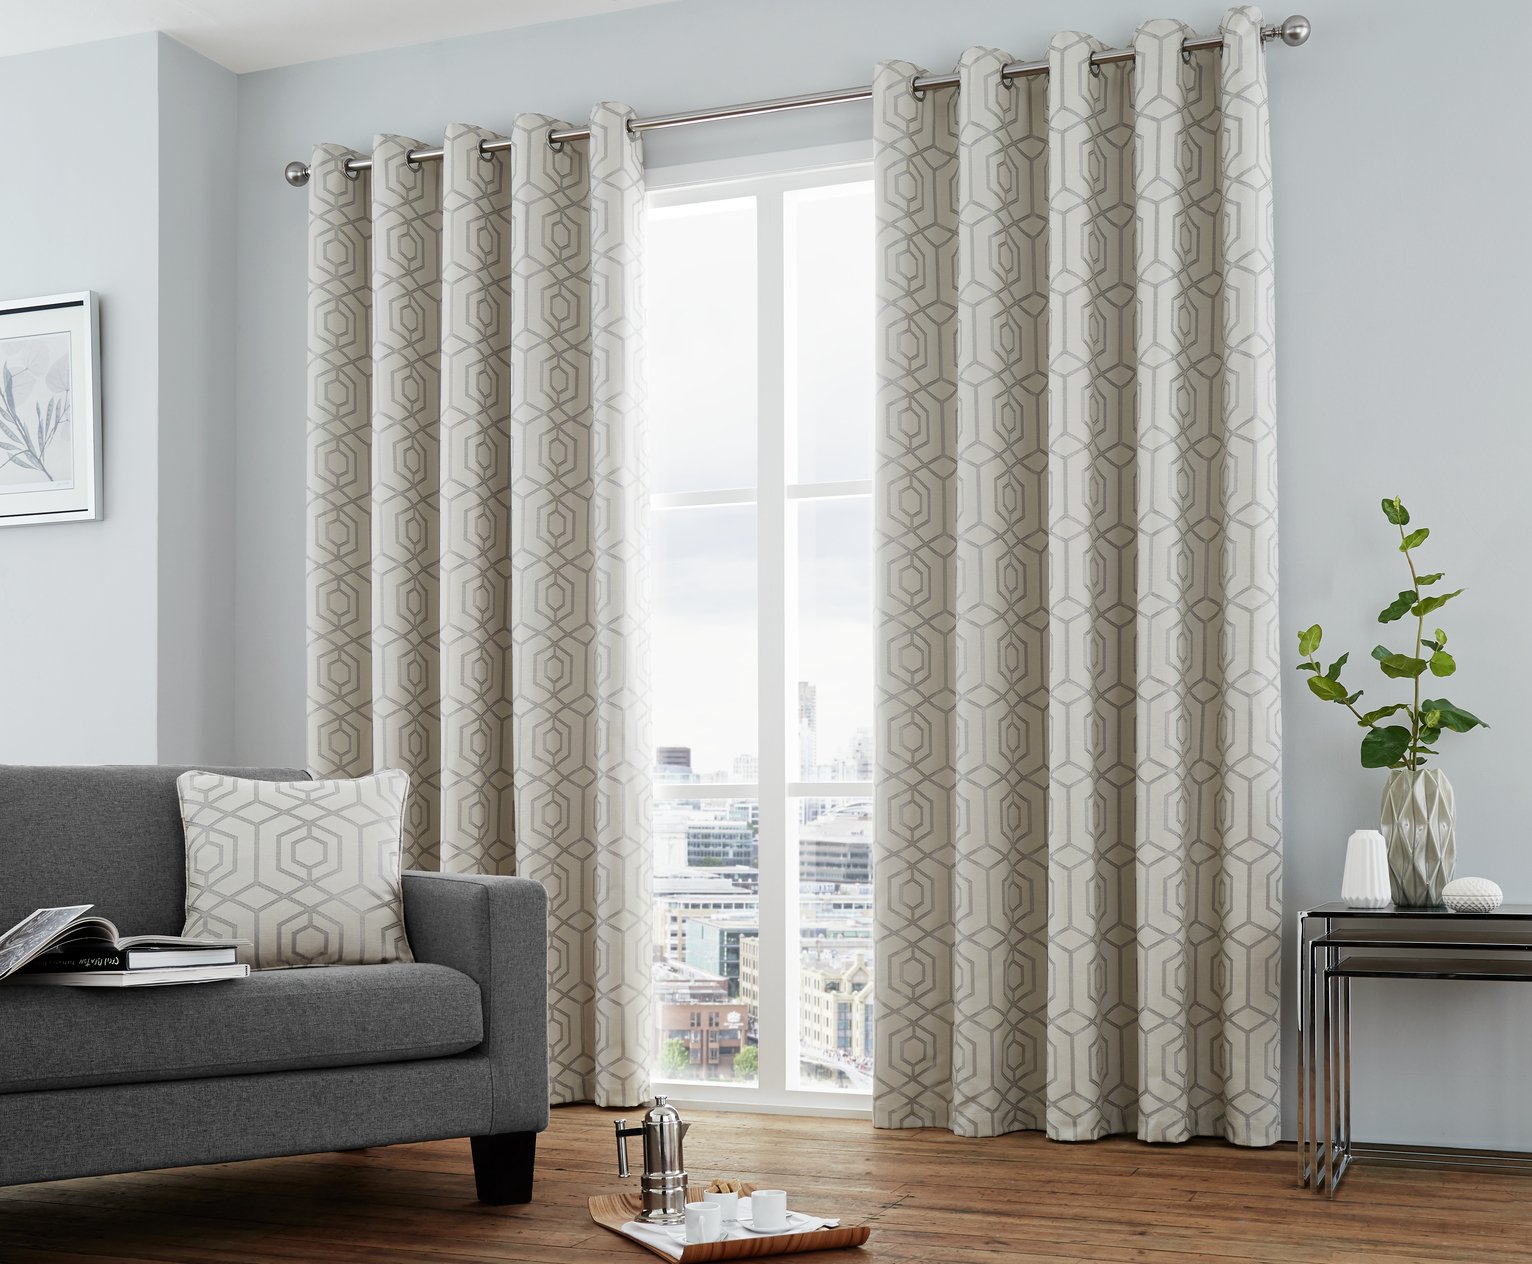 Curtina Camberwell Eyelet Curtains - 117x183cm - Silver